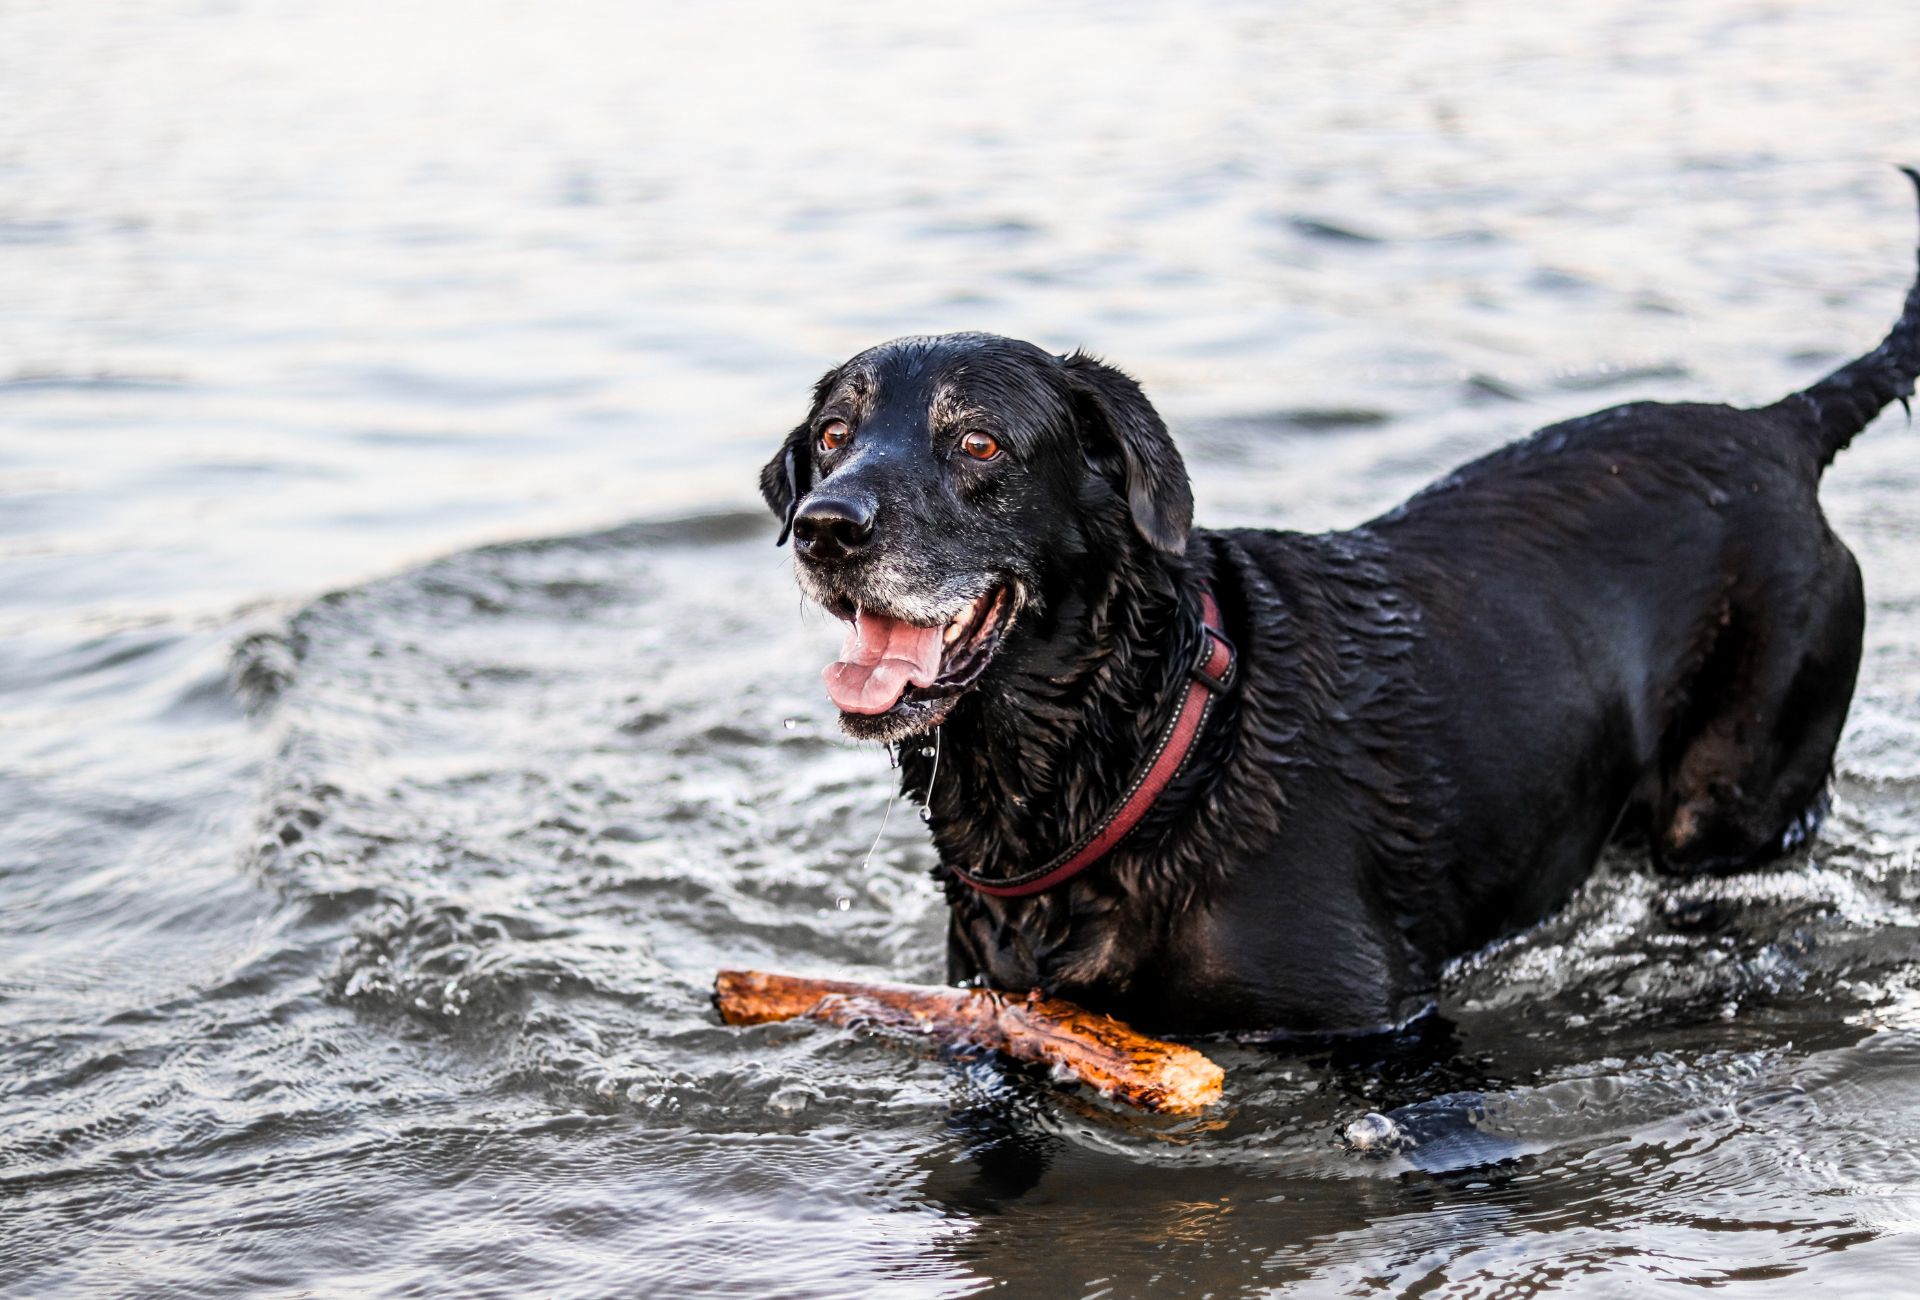 Black senior dog standing in water with a stick.